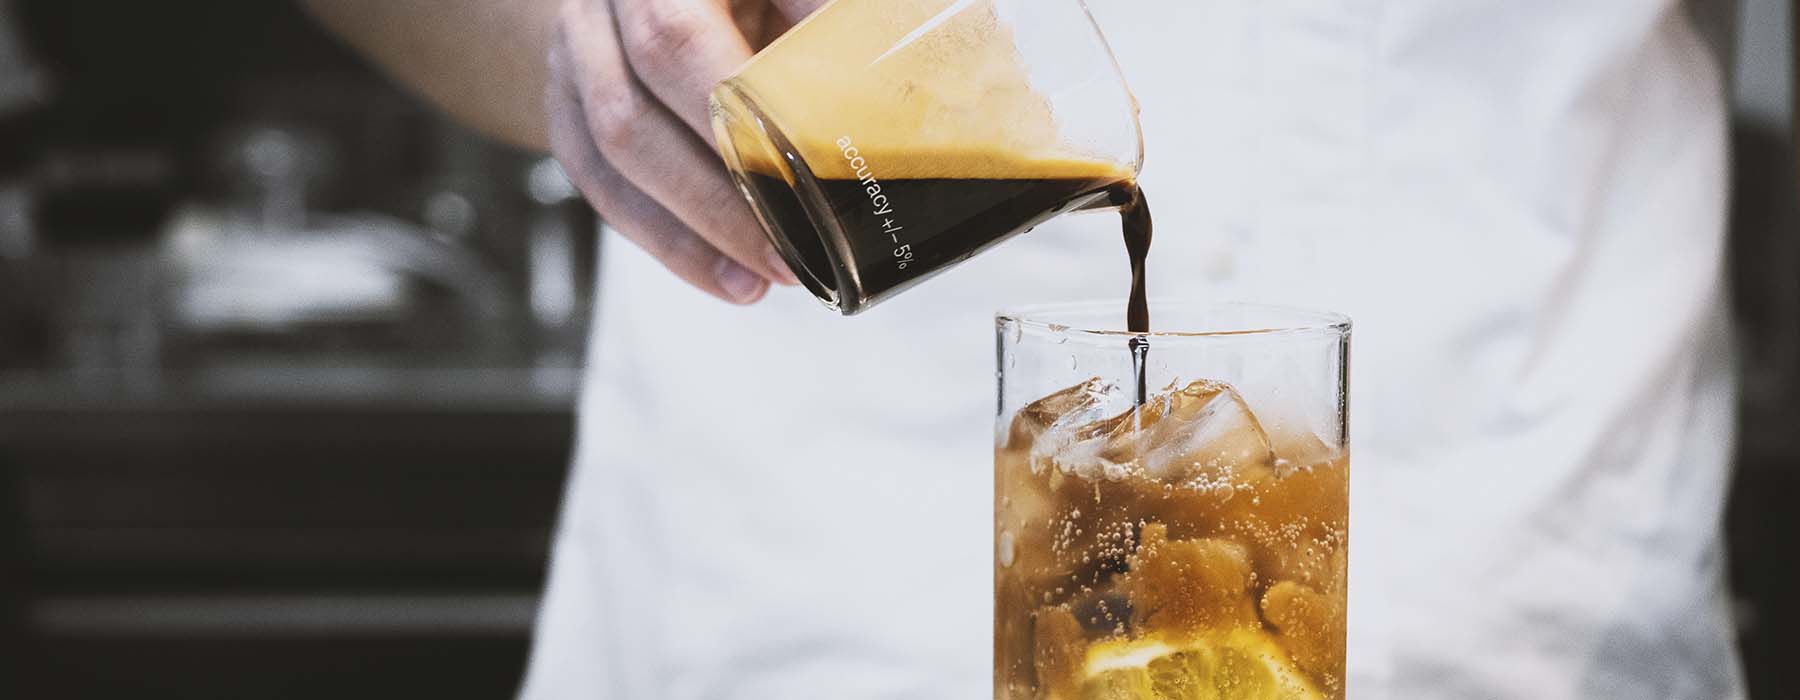 EspressoWorks Blog - 8 Sugar Alternatives for Coffee You Didn’t Know Existed - Coffee Tonic